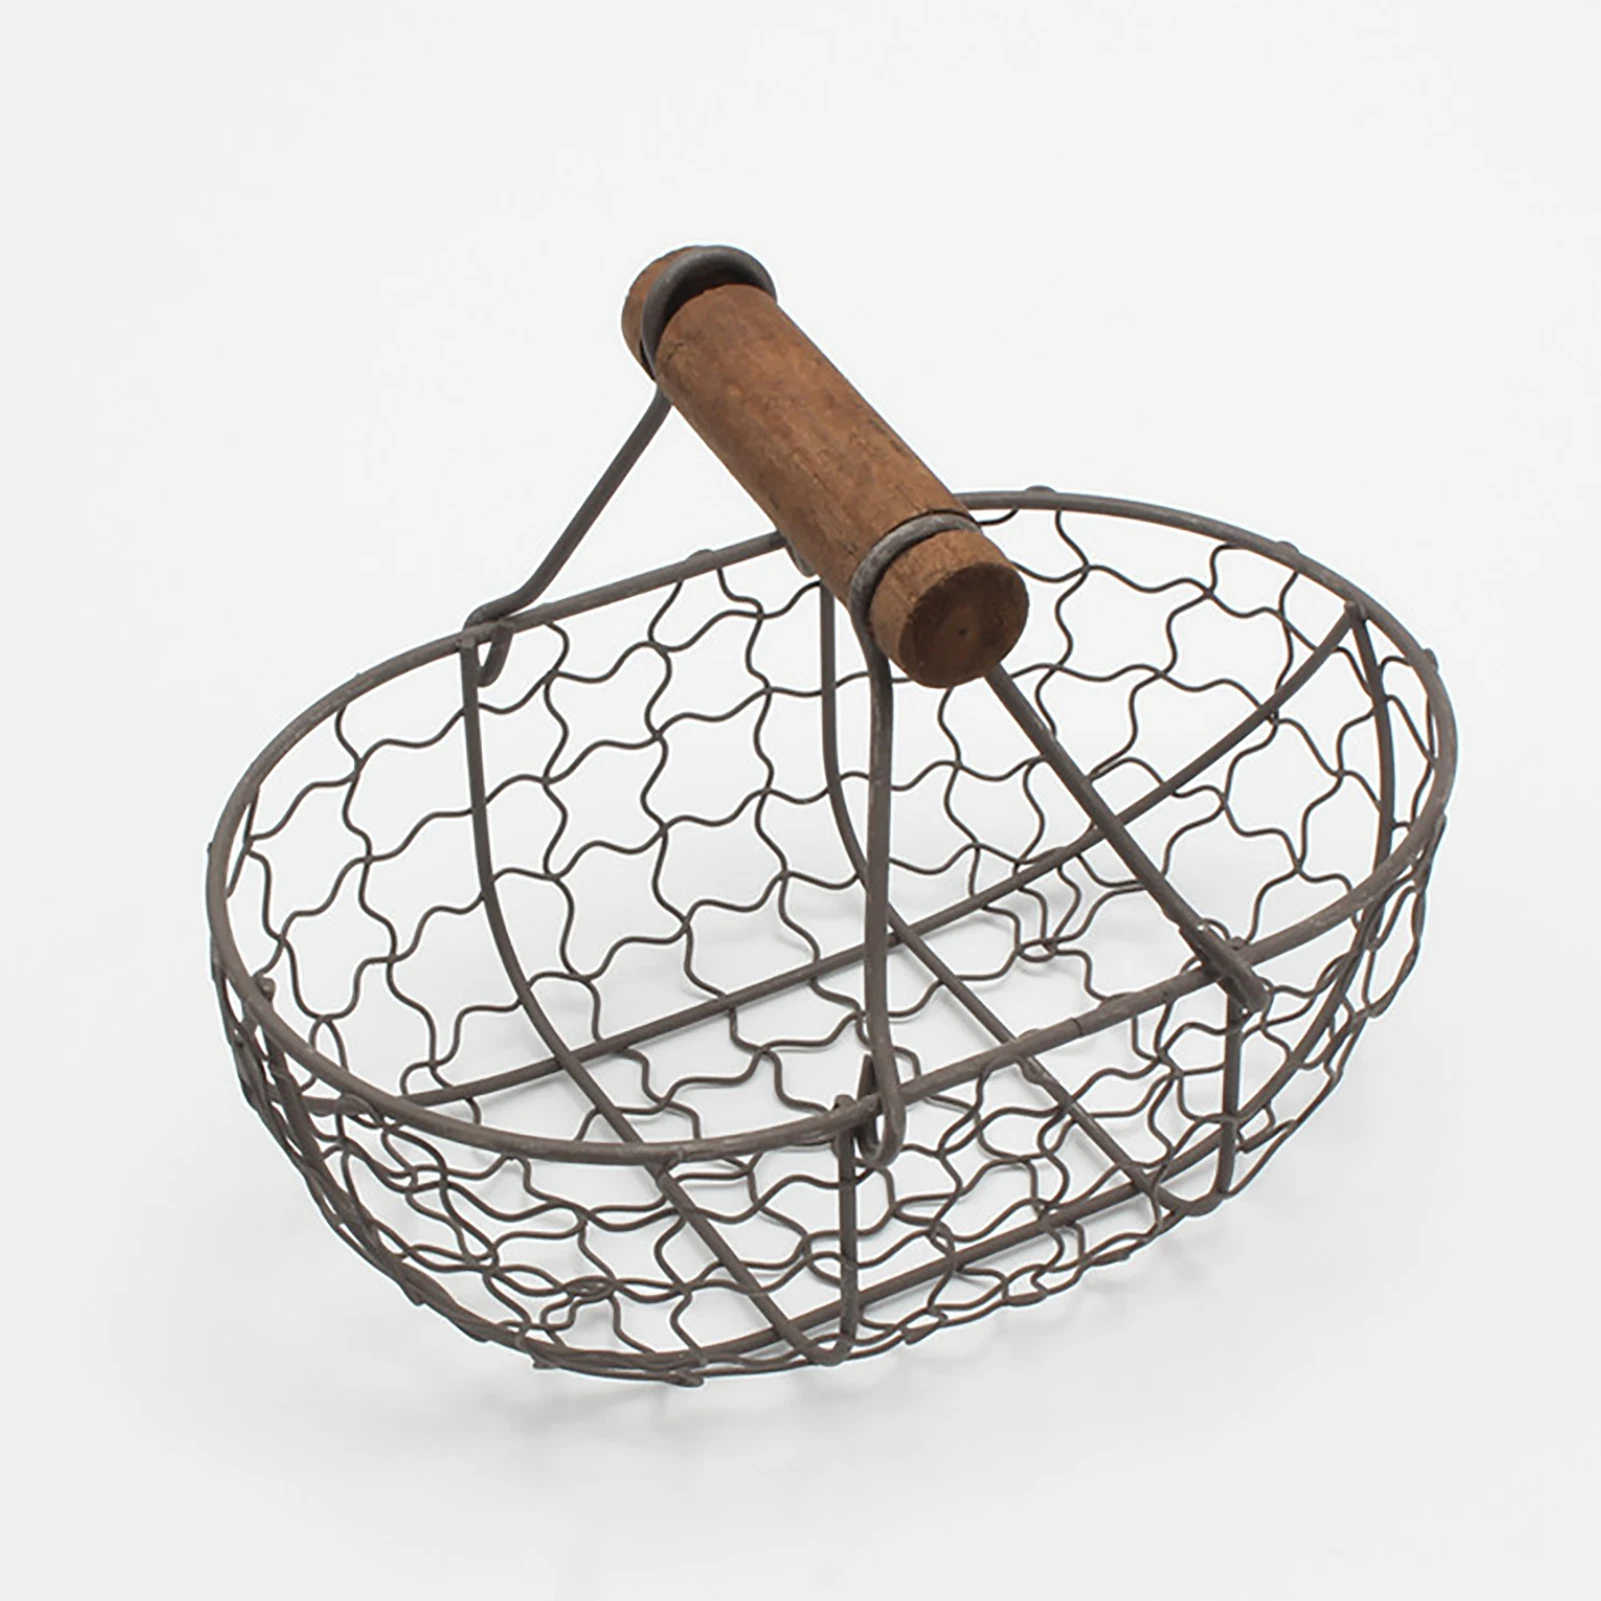 Details about   AB_ Simple Geometric Fruit Vegetable Wire Mesh Metal Basket Storage Bowl Contain 